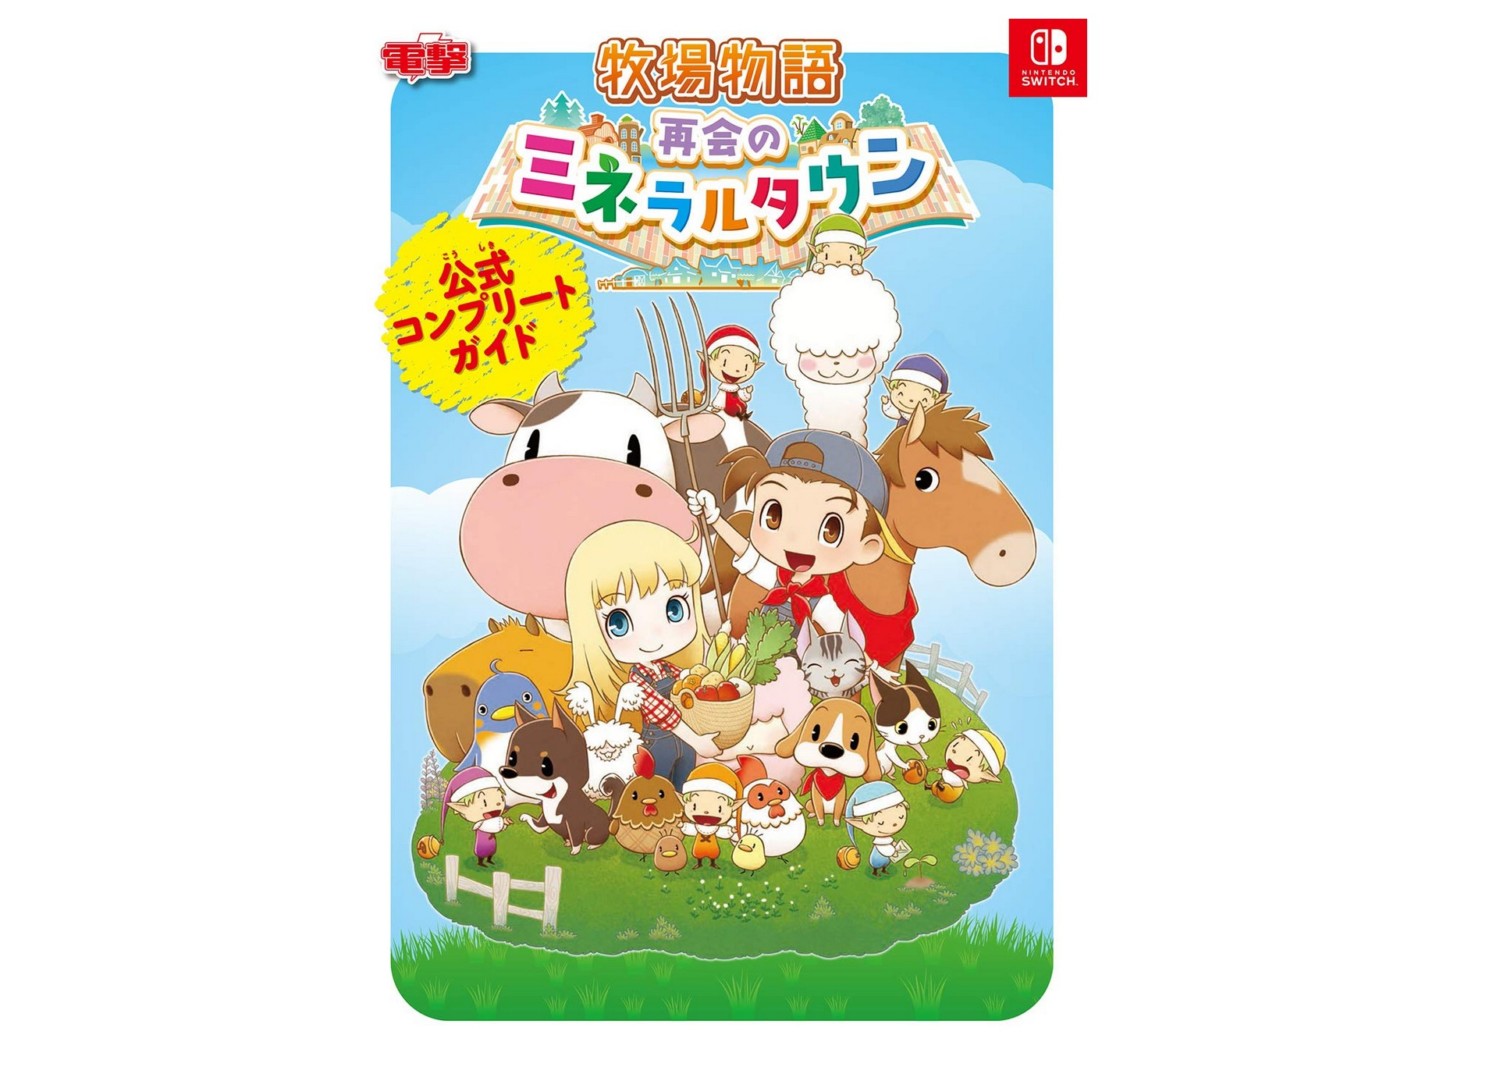 SEASONS: Japan of STORY Town NintendoSoup Mineral – Guidebook Announced In Friends OF